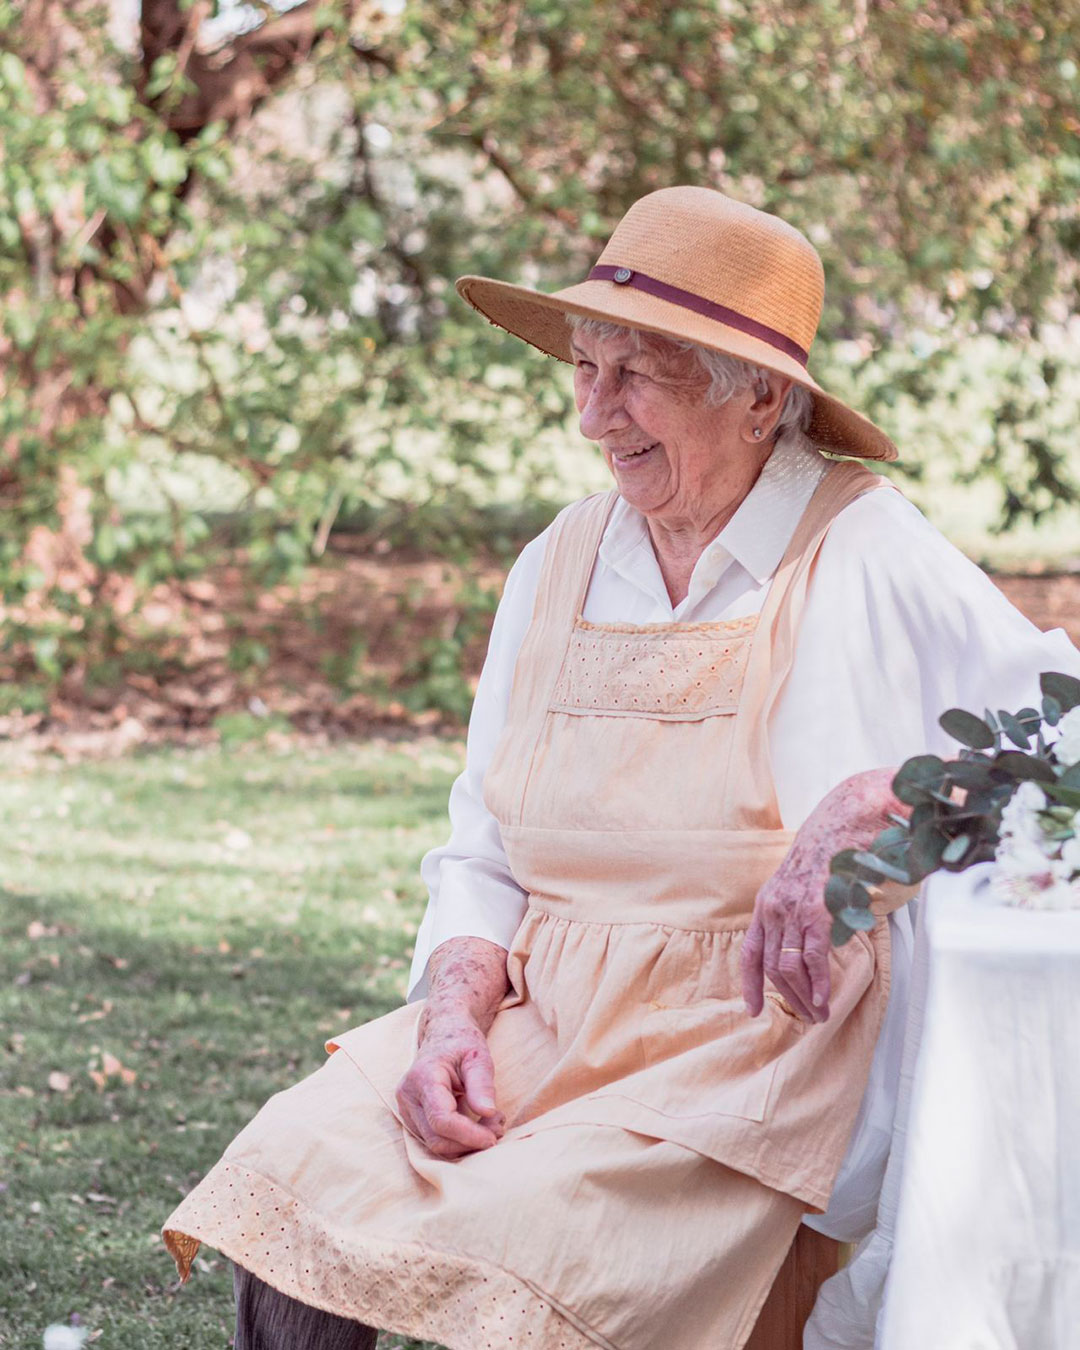 Lilia, Veronica's 94-year-old grandmother who inspired Veronica's business idea